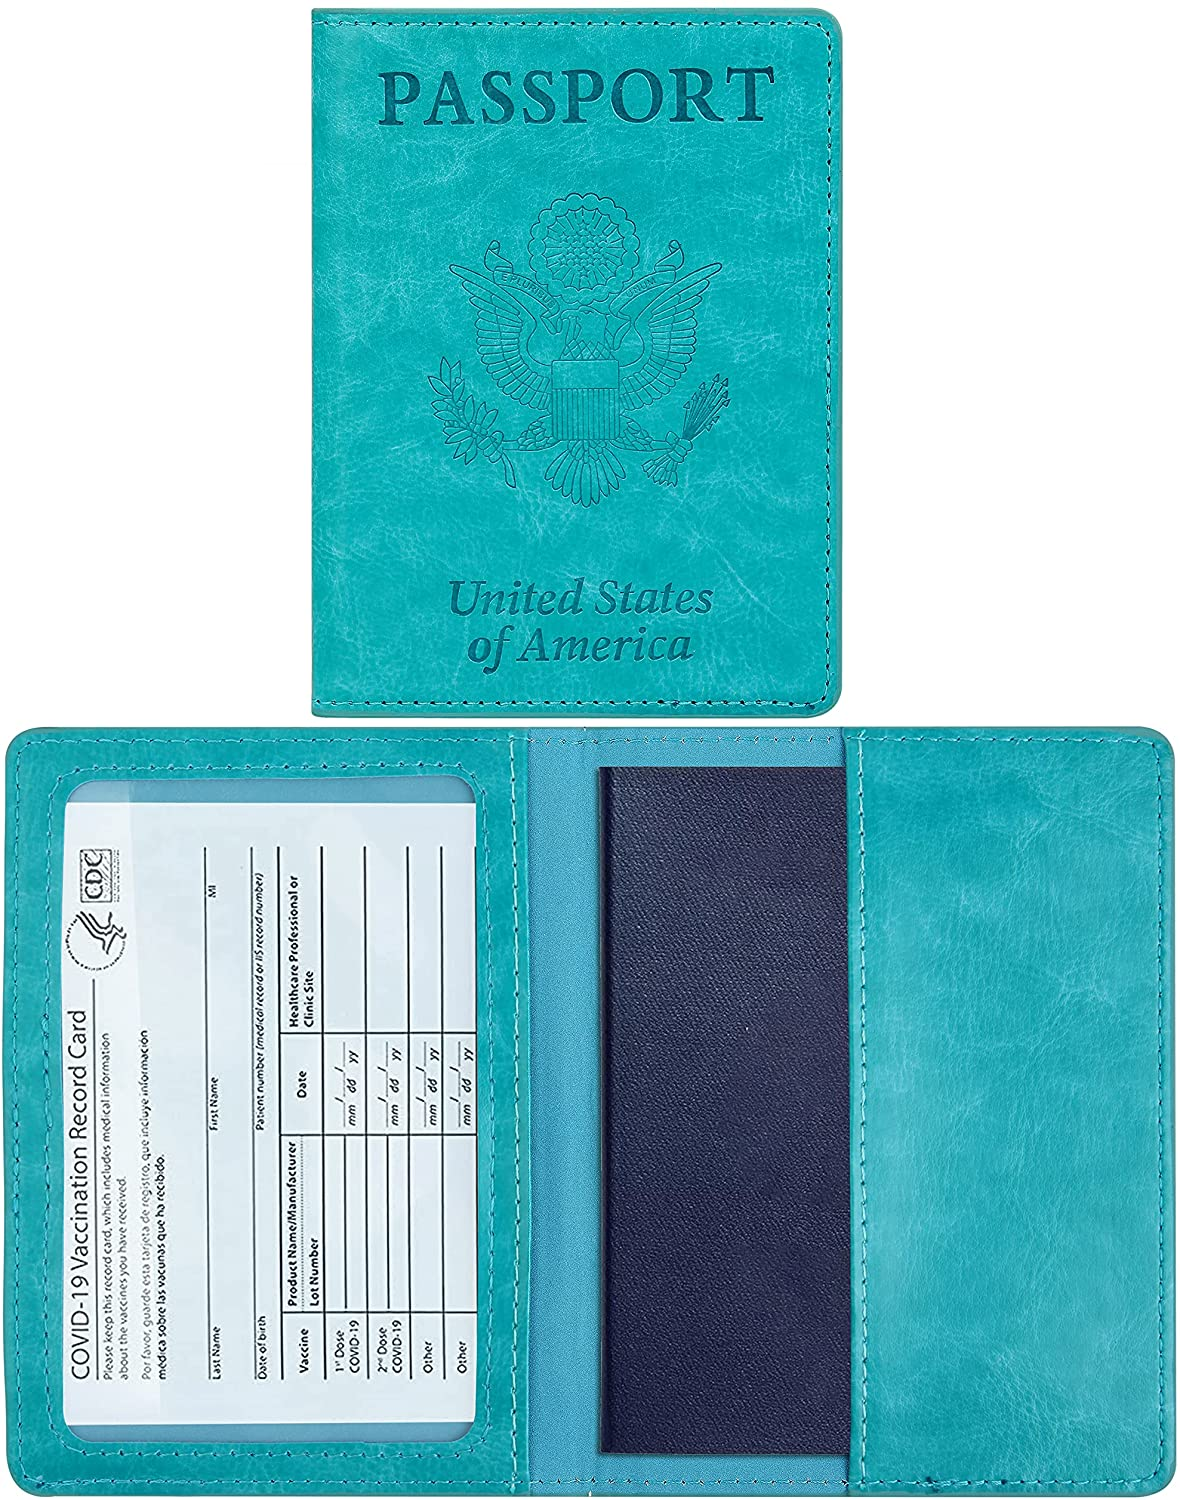 Passport and Vaccine Card Holder Combo - Passport Holder with Vaccine Card Slot Waterproof, Synthetic Leather Passport Case Protector, Stylish Passport Cover with 3D Embossed Patterns, Ultra Slim Passport Holders for Men and Women